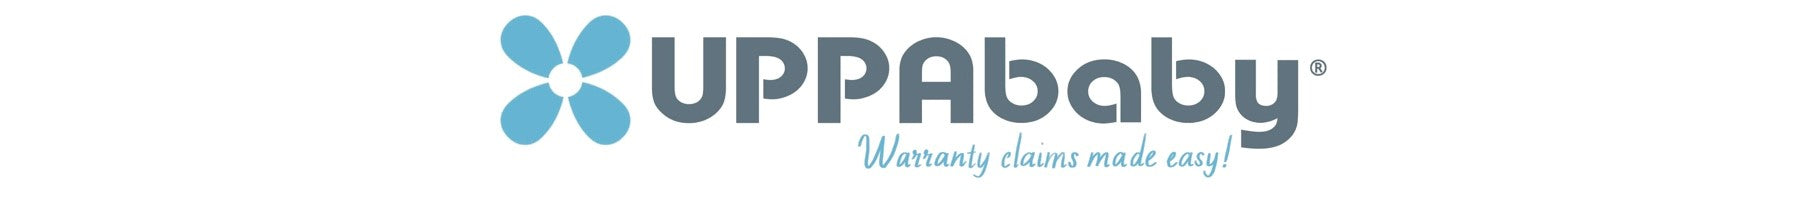 Uppababy Warranty Claims made easy!